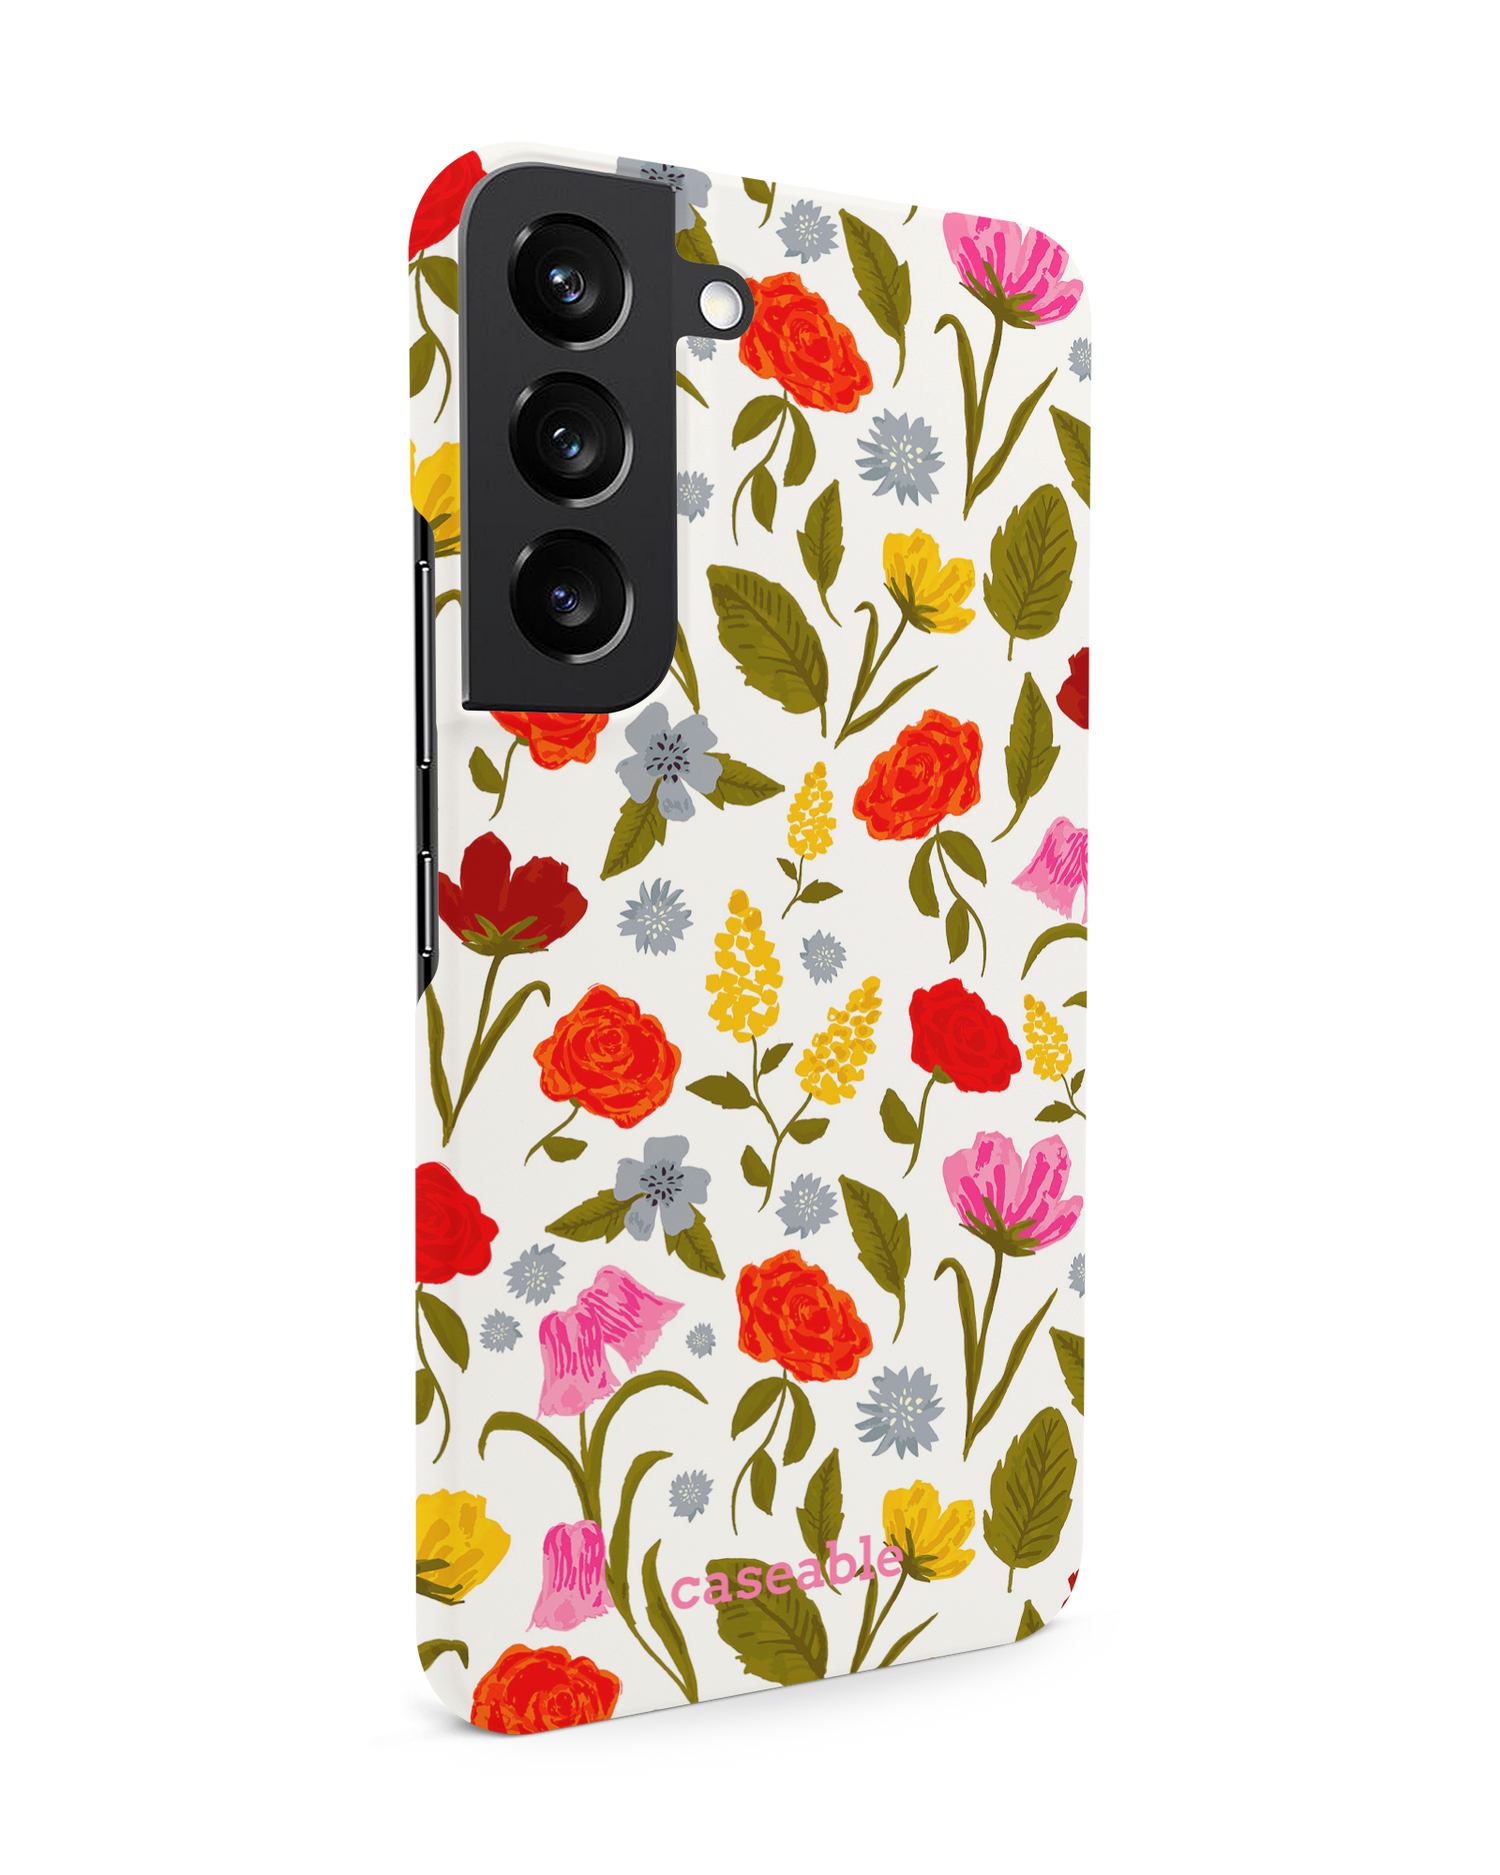 Botanical Beauties Hard Shell Phone Case Samsung Galaxy S22 5G: View from the left side